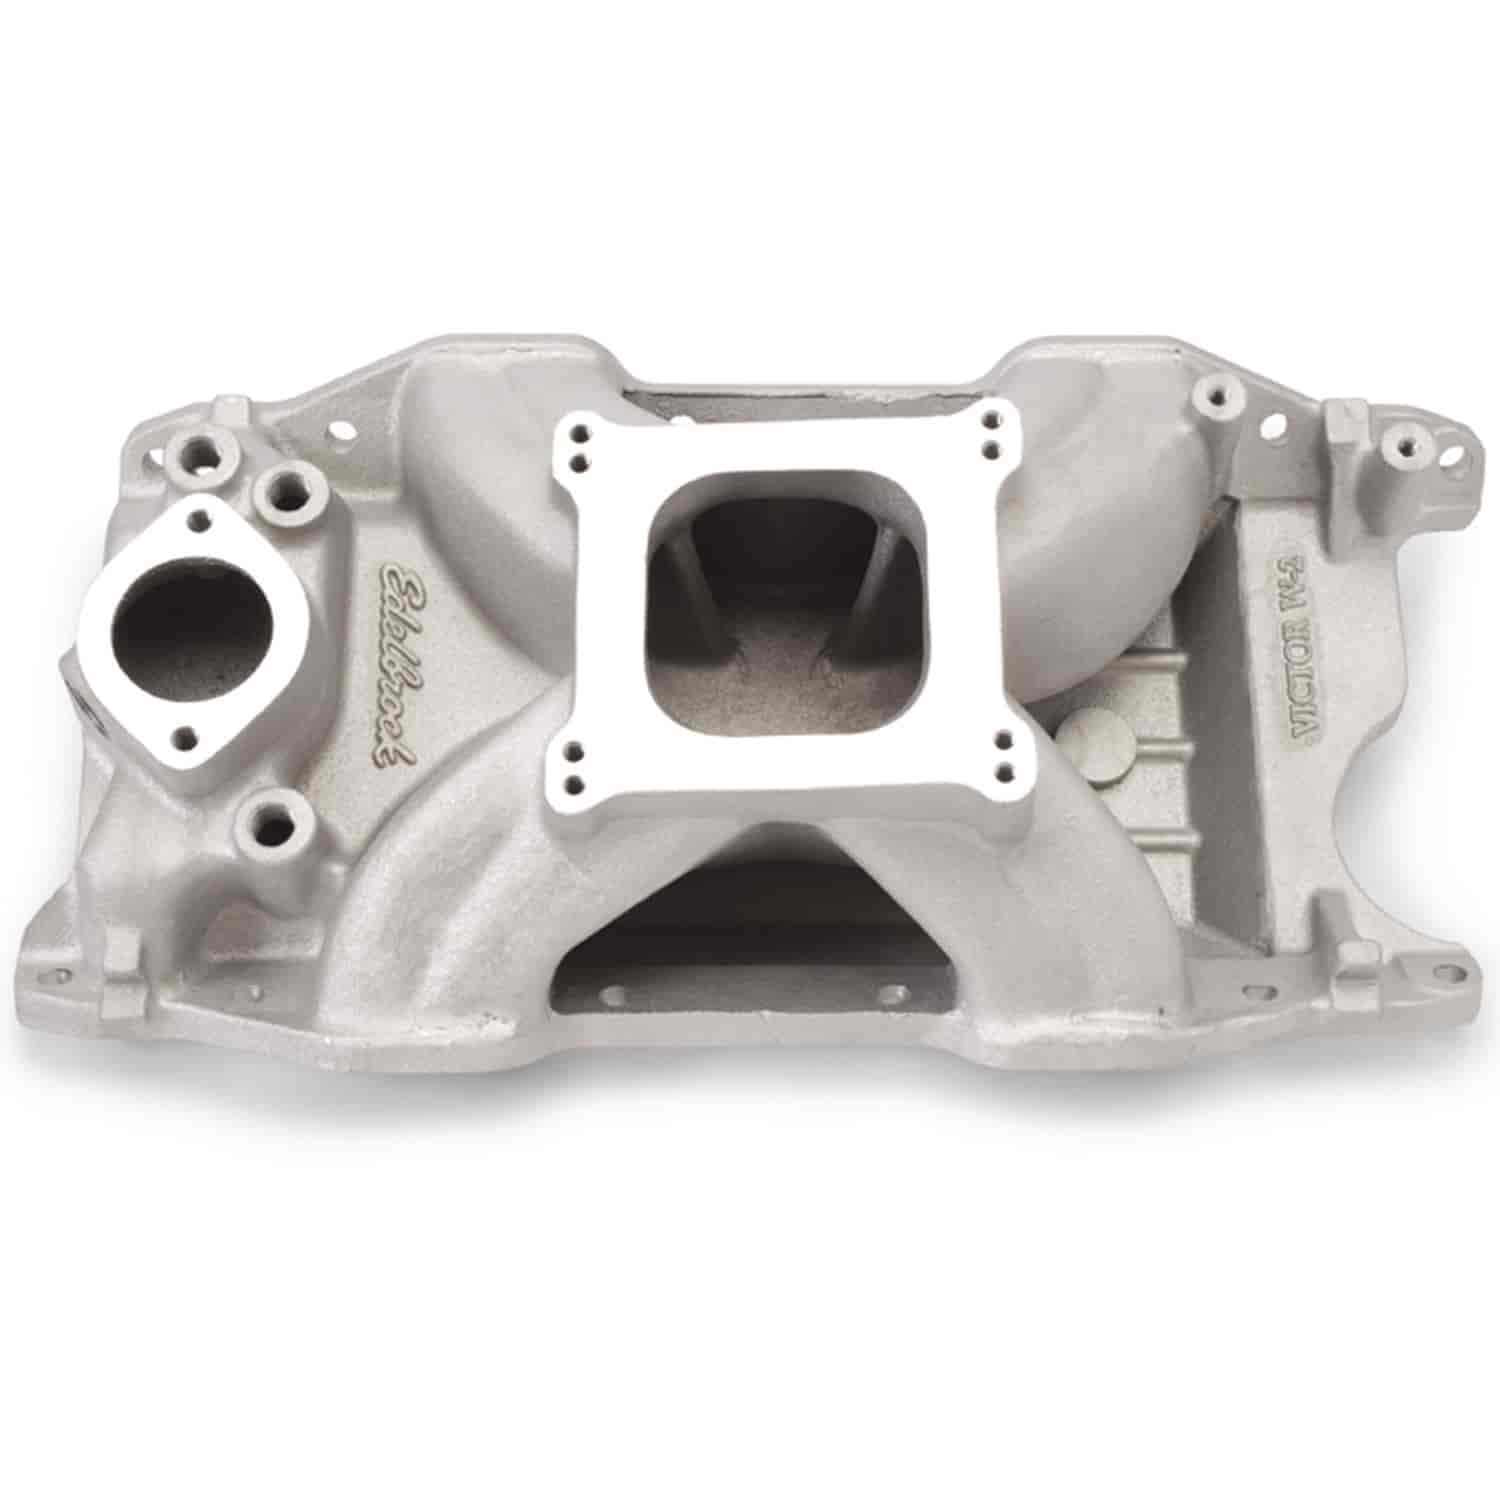 Victor W-2 Intake Manifold Small Block Chrysler/Mopar 318-360 with W-2 oval port heads